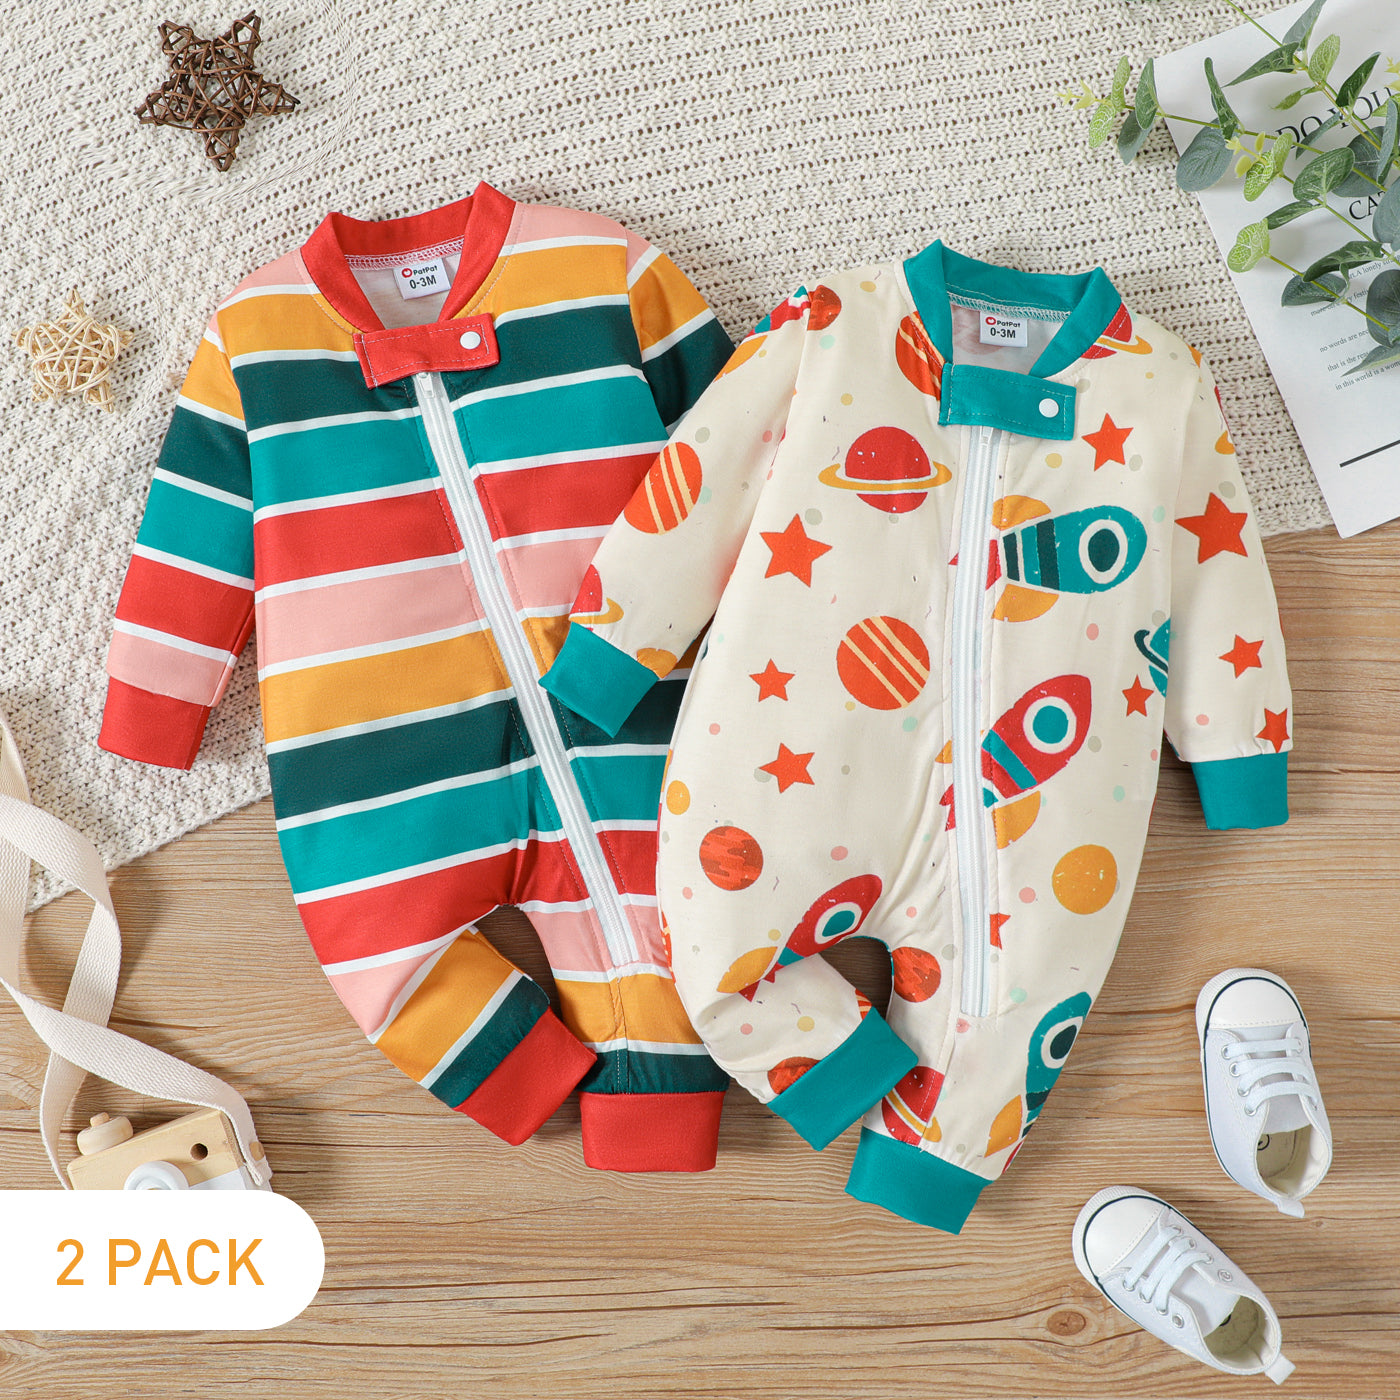 2-Pack Baby Boy/Girl Long-sleeve Zipper Graphic Jumpsuits Set